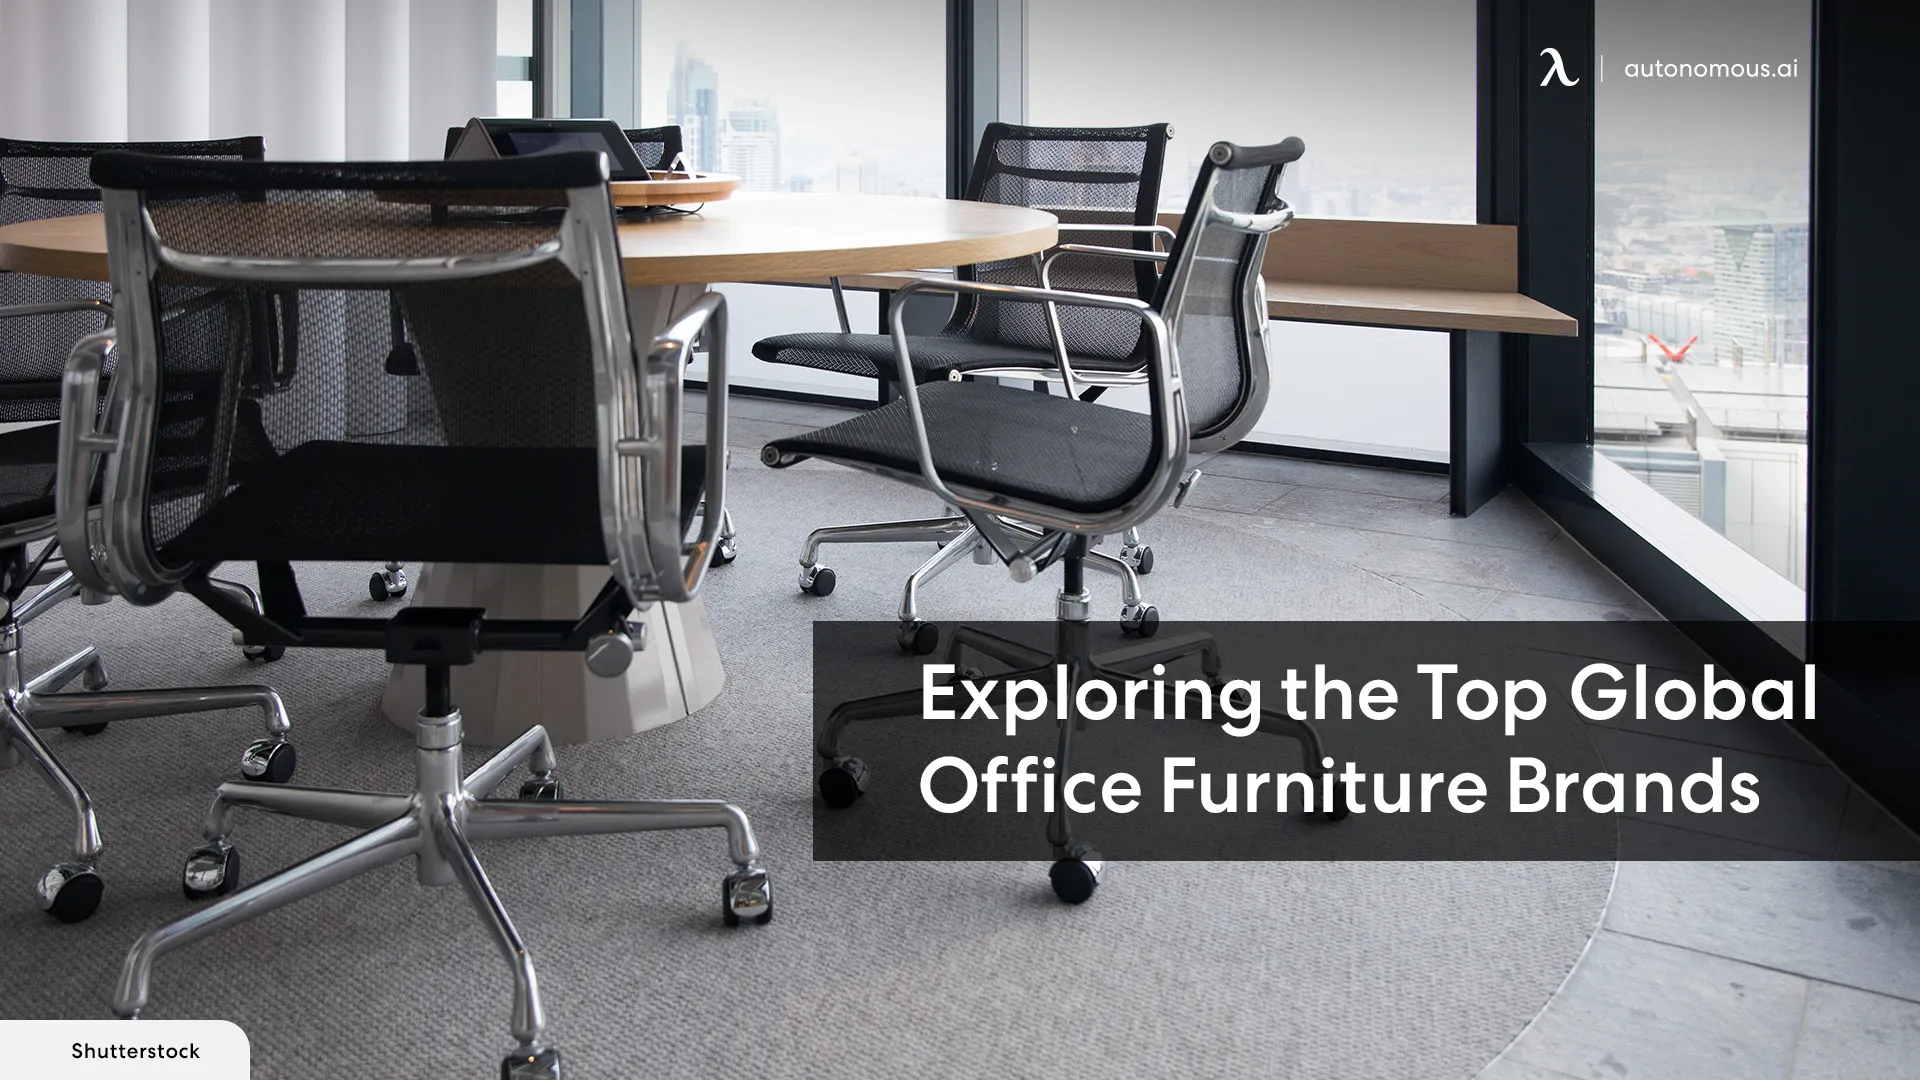 Unveiling the Giants: Exploring the Top Global Office Furniture Brands